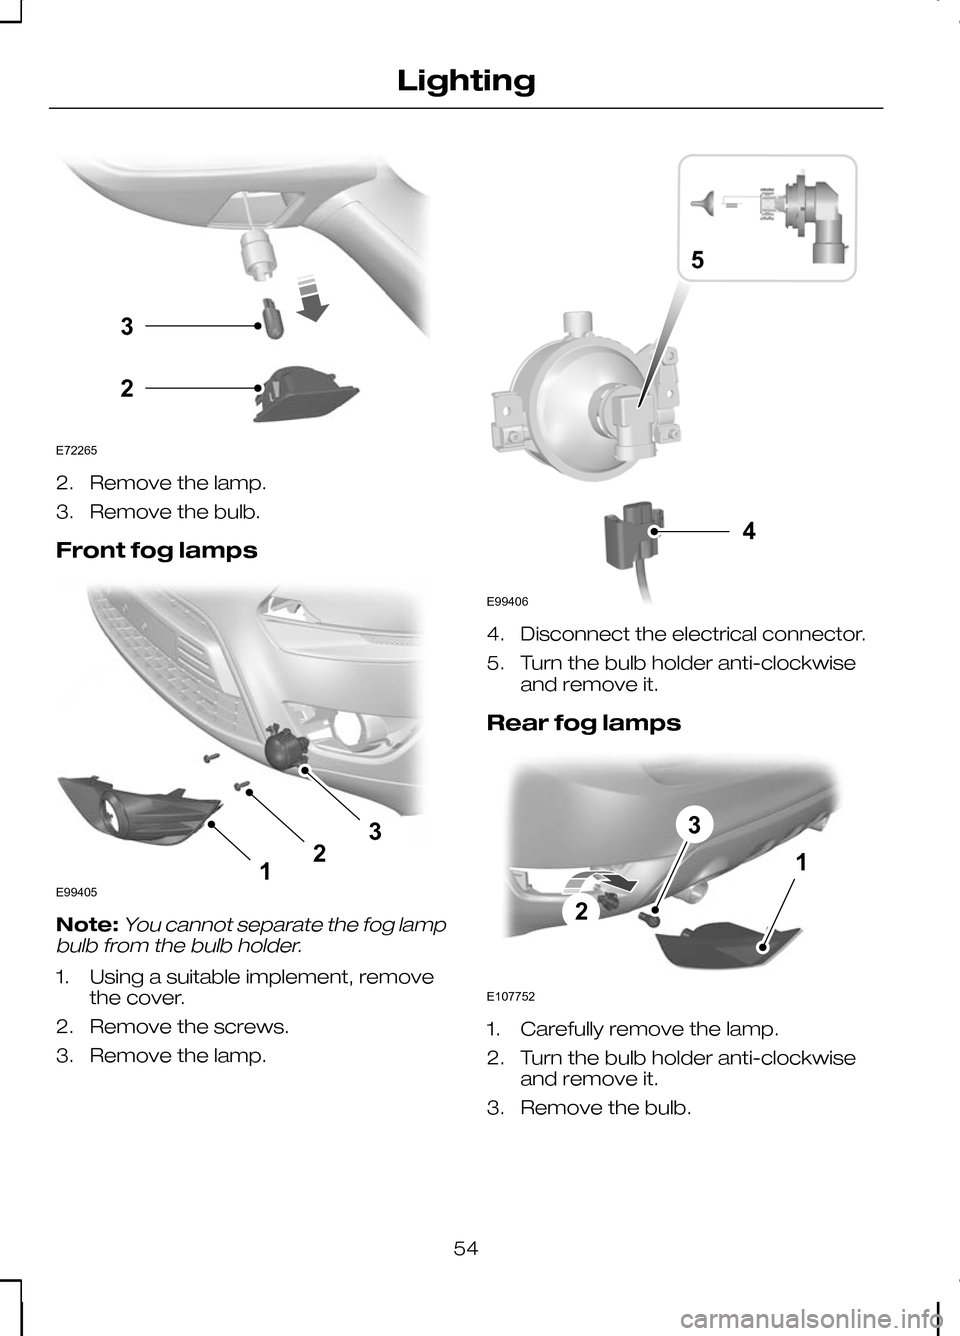 FORD KUGA 2010 1.G Owners Manual 2. Remove the lamp.
3. Remove the bulb.
Front fog lamps
Note:You cannot separate the fog lamp
bulb from the bulb holder.
1. Using a suitable implement, remove the cover.
2. Remove the screws.
3. Remov